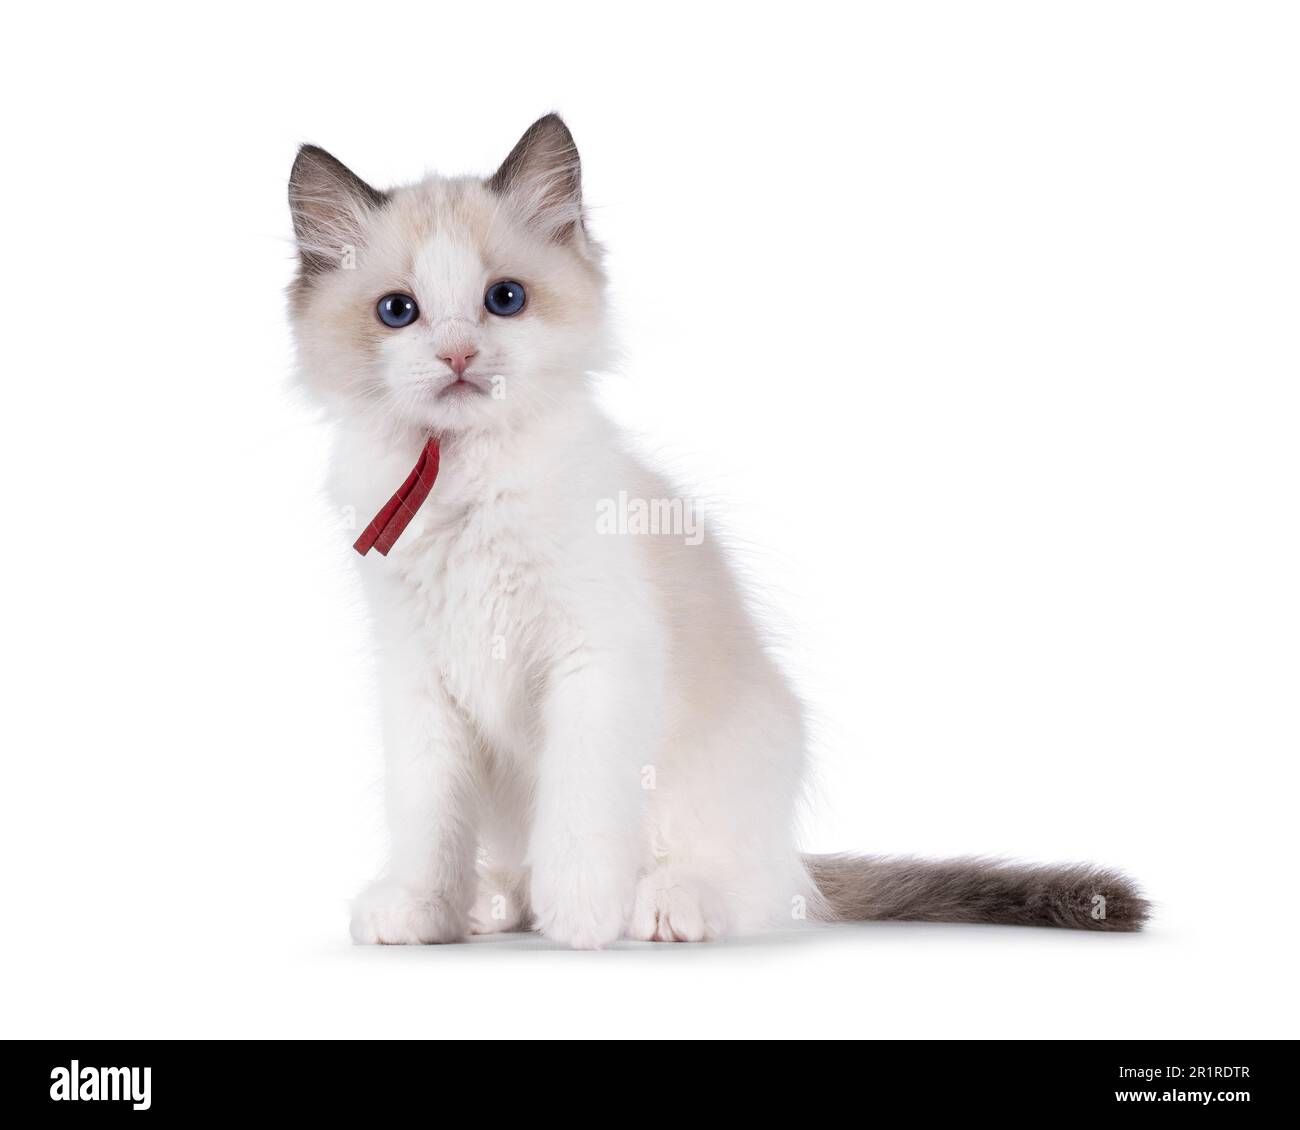 Cute bicolor Ragdoll cat kitten, sitting up facing front. Looking towards camera with blue eyes. Isolated on a white background. Stock Photo